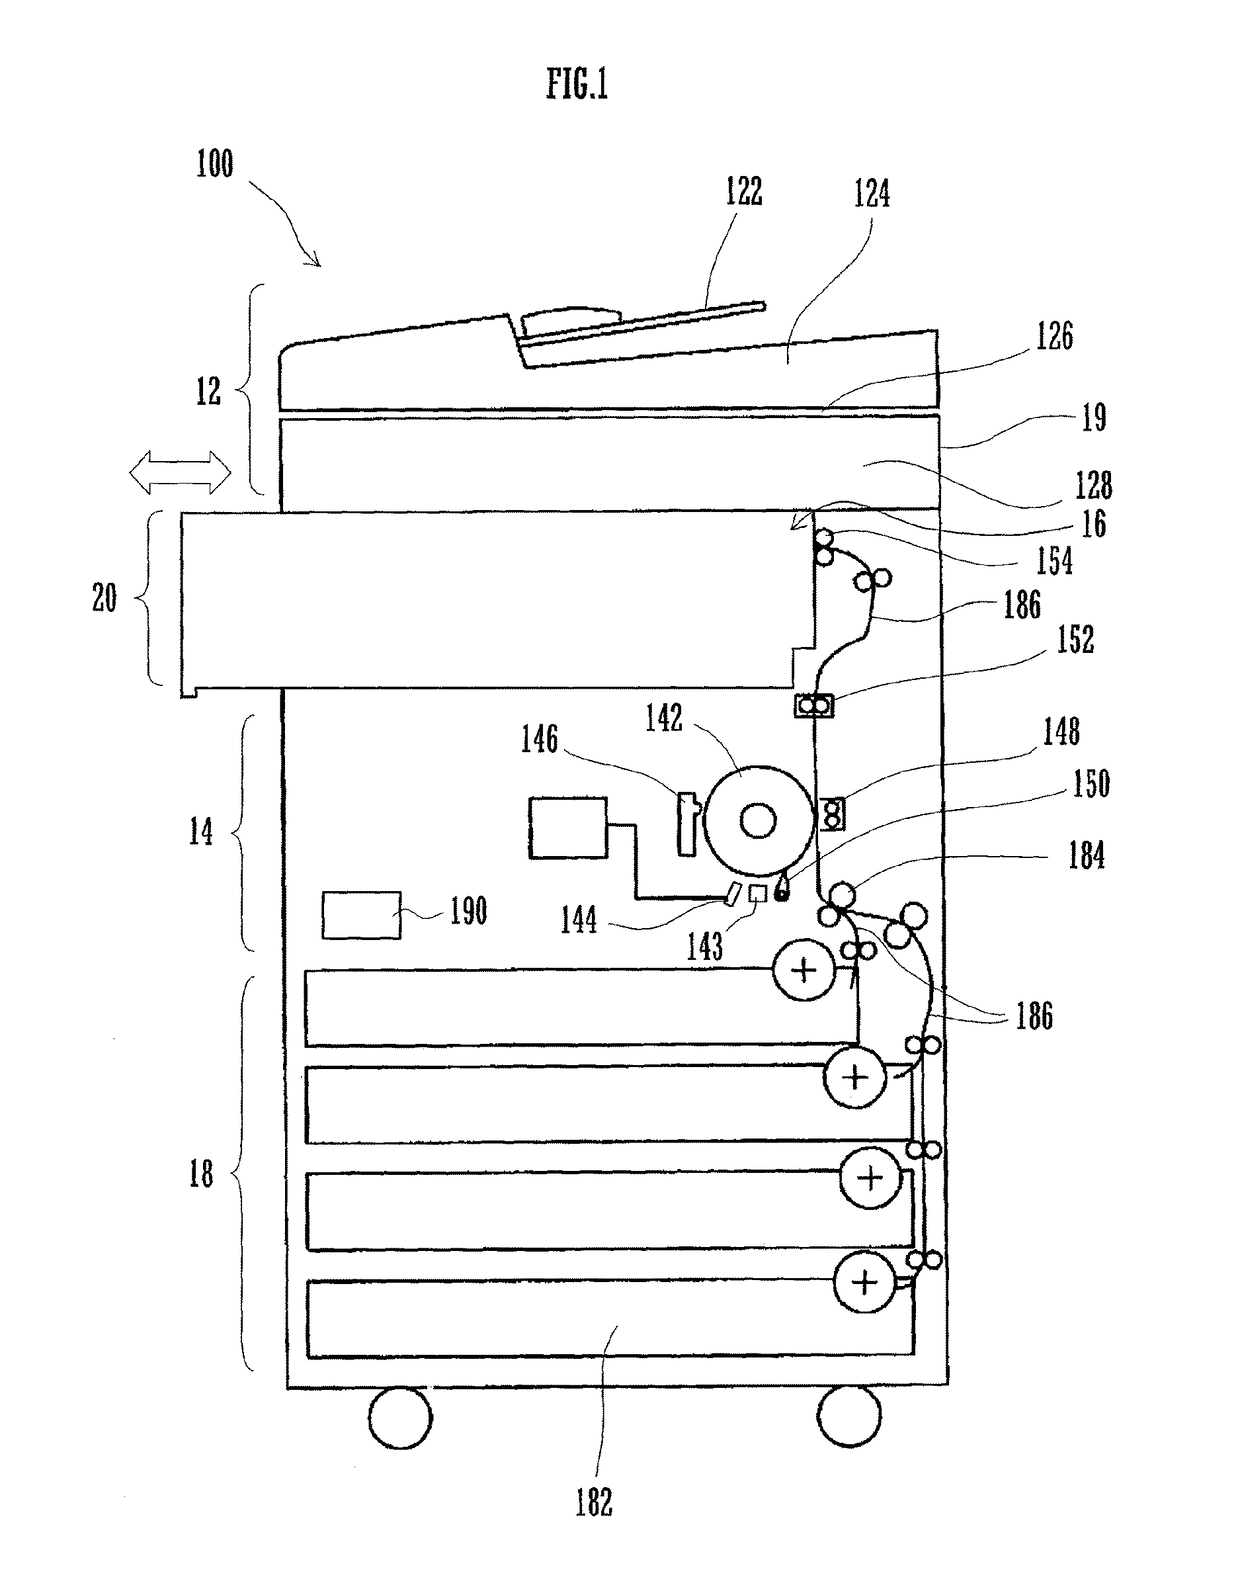 Image forming apparatus provided with post-processing device